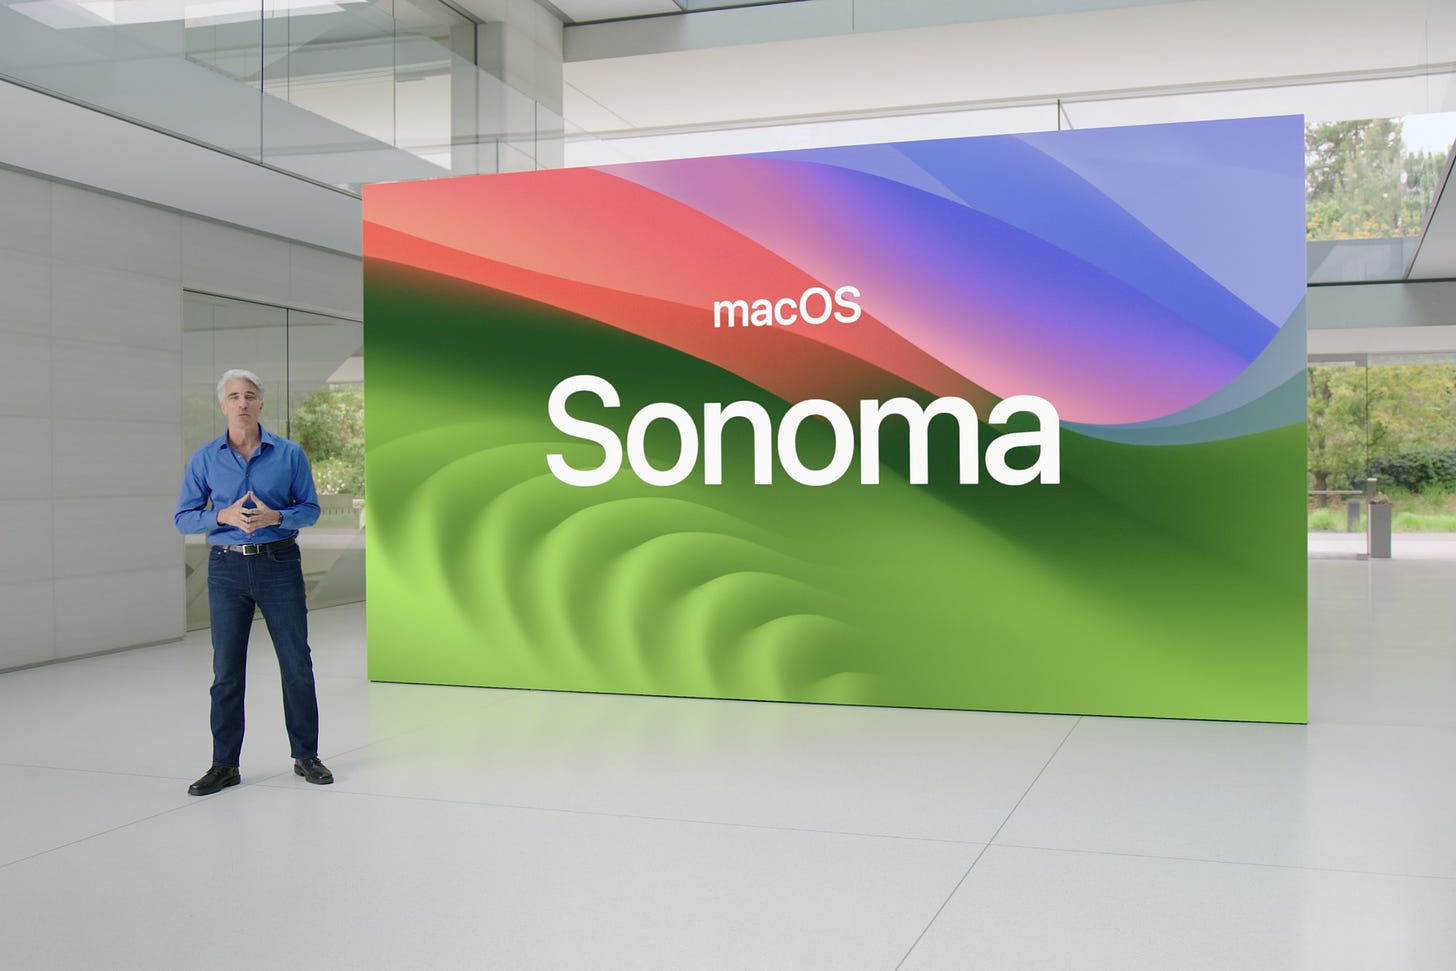 Apple announces macOS Sonoma with game mode and support for desktop widgets  - The Verge